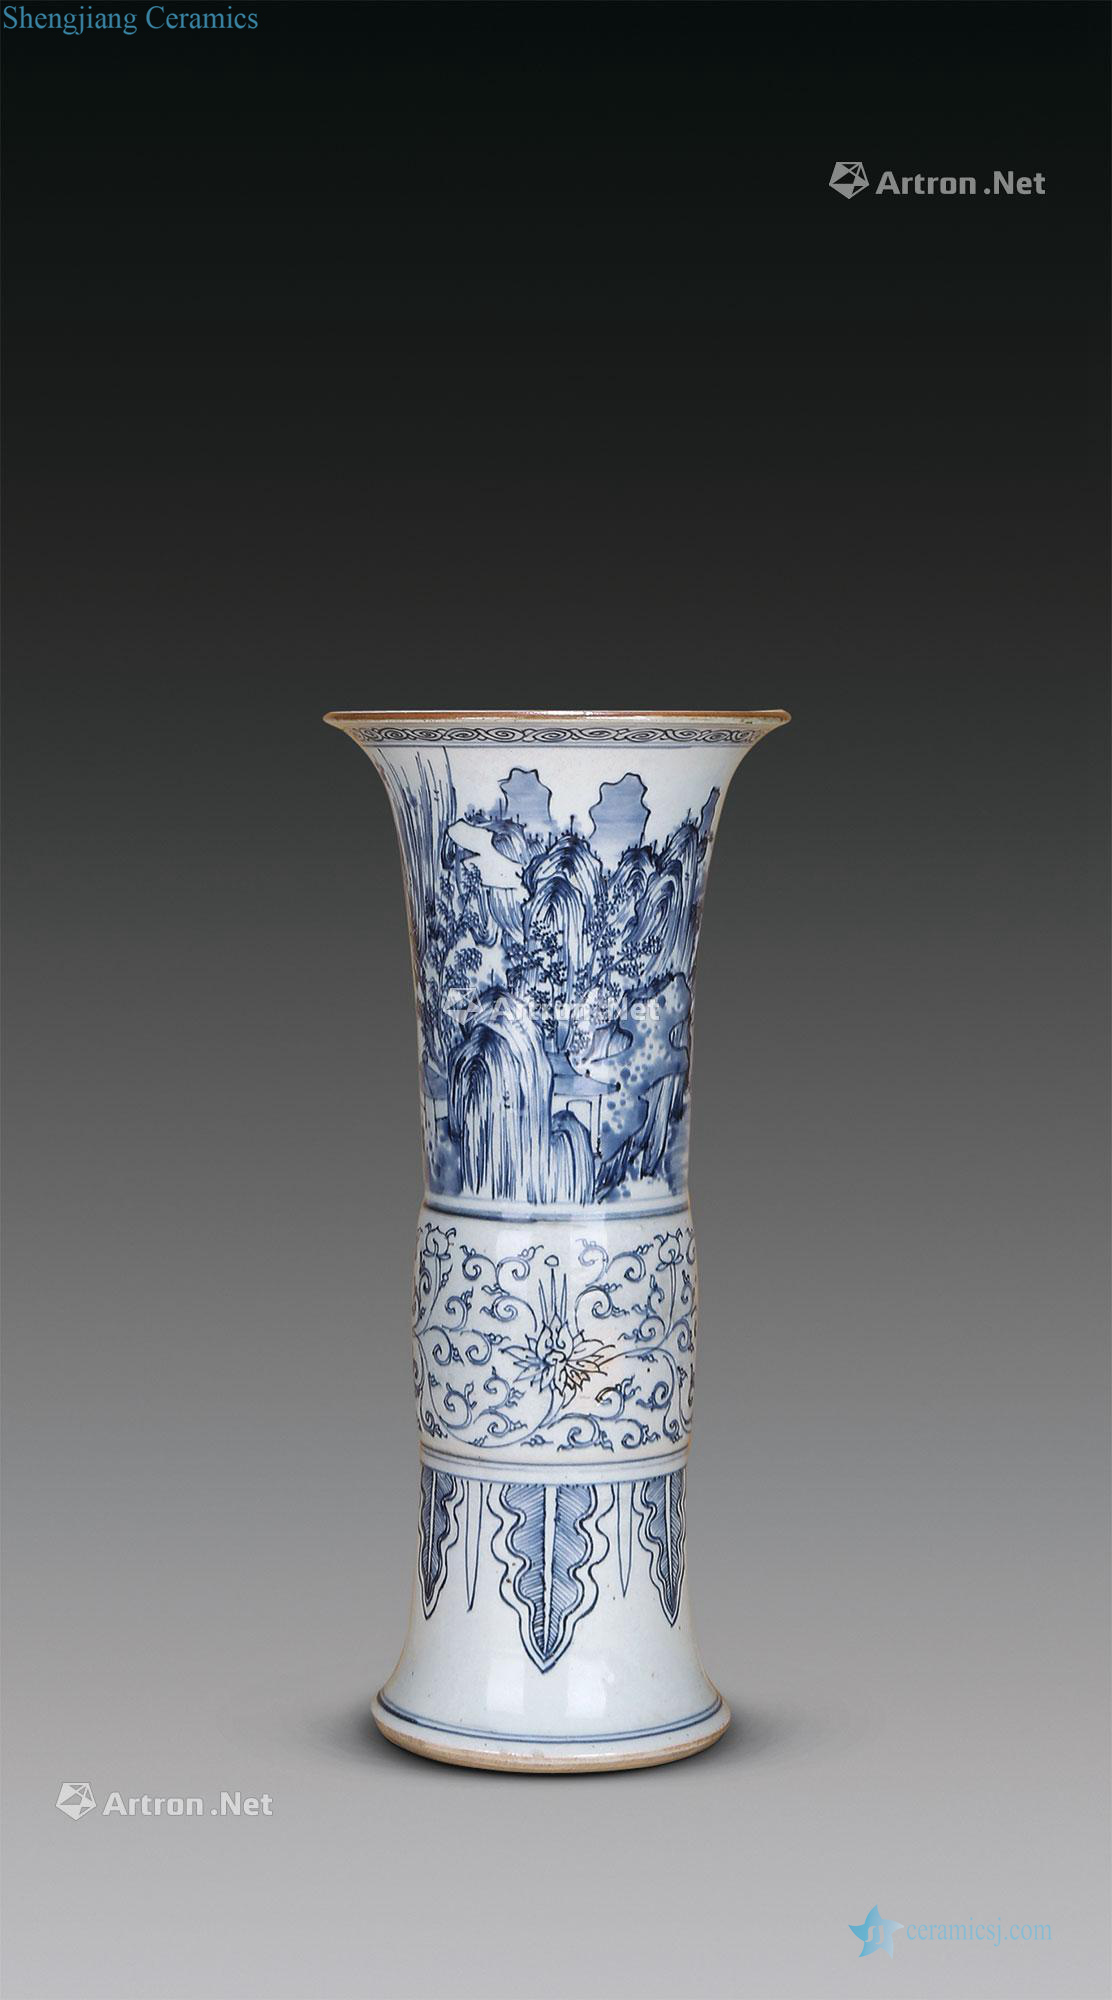 The qing emperor kangxi Grain flower vase with blue and white landscape characters